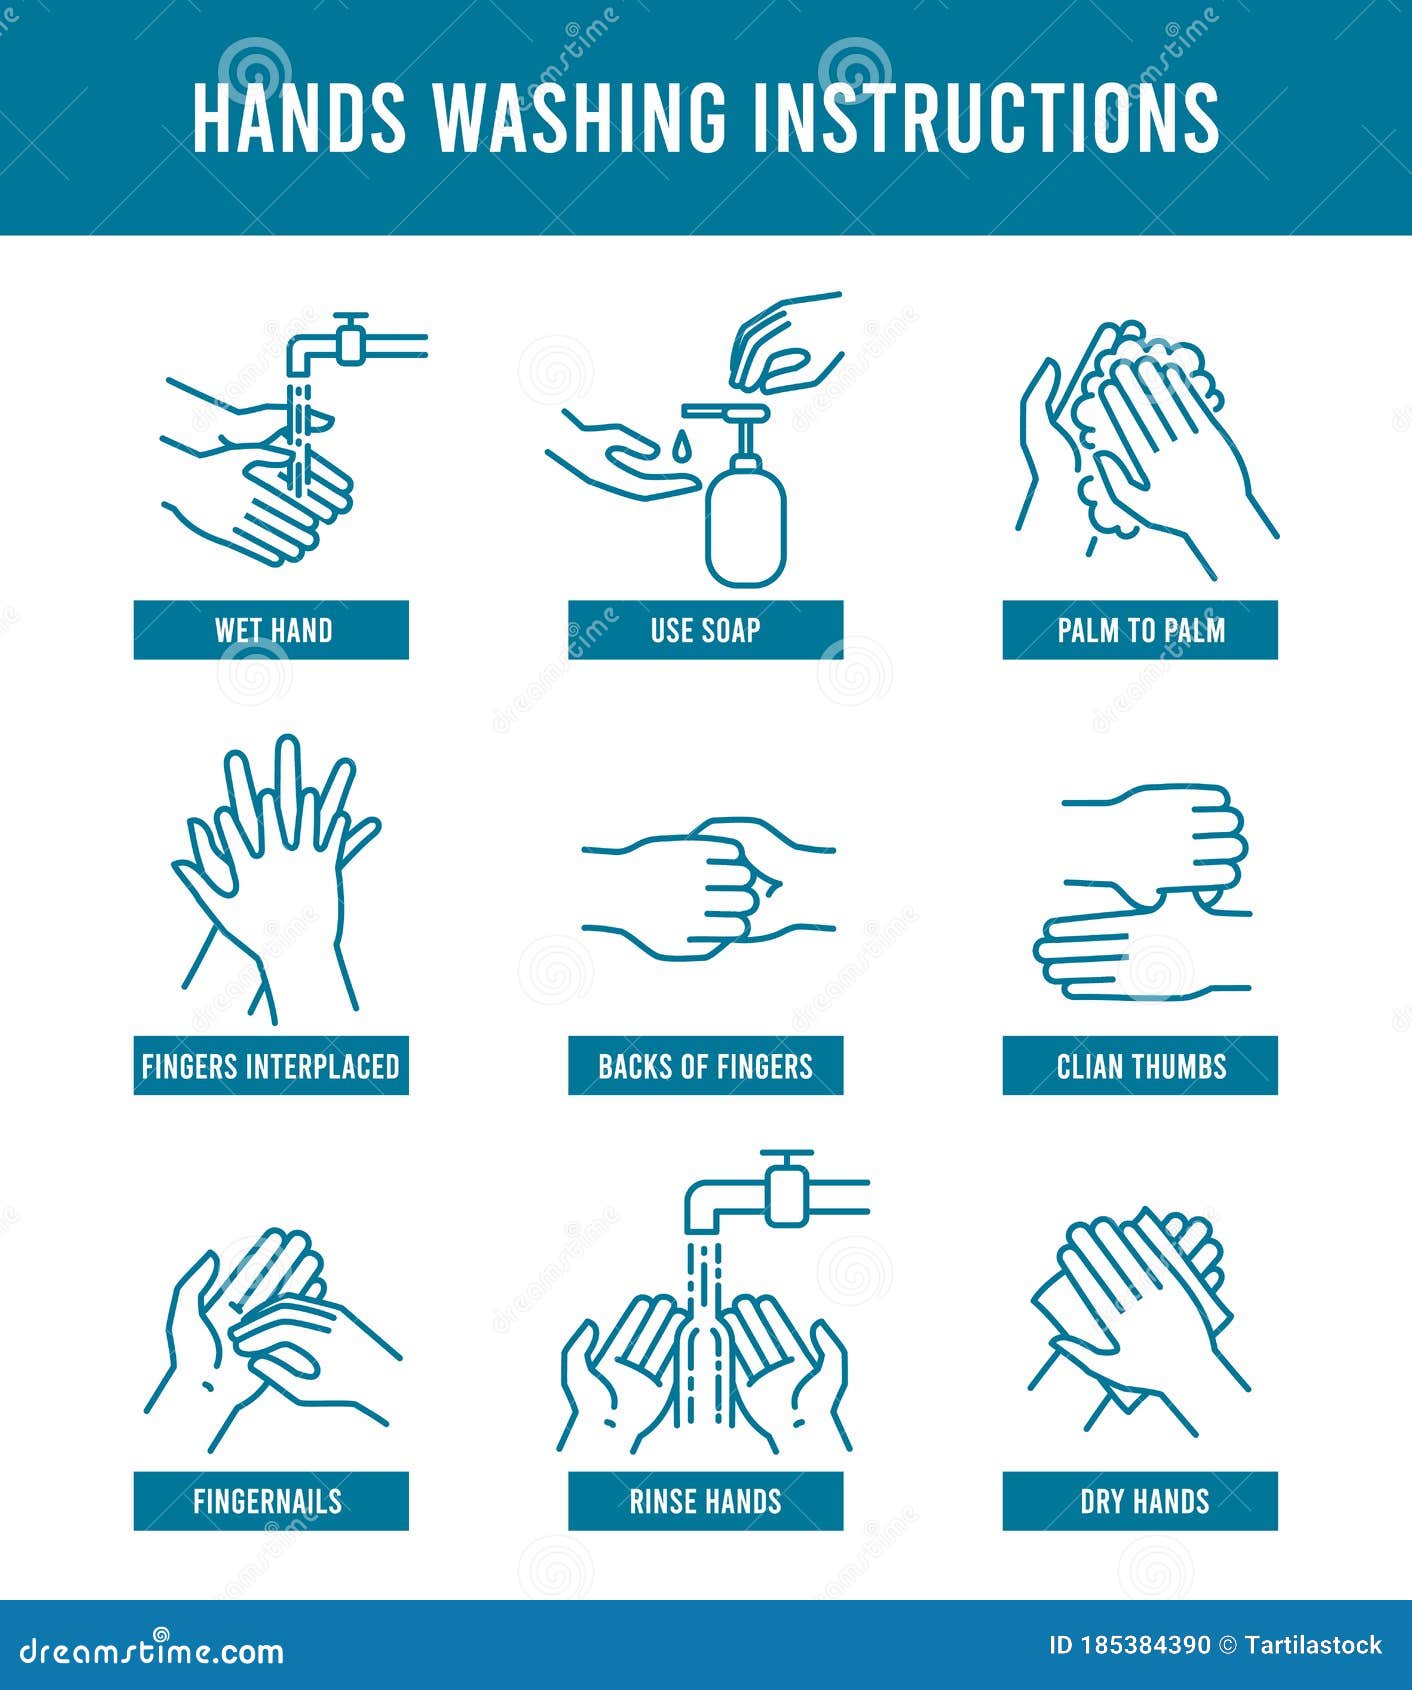 hand washing instruction. step by step tutorial how to wash dirty hands. health protection, prevent virus and hand